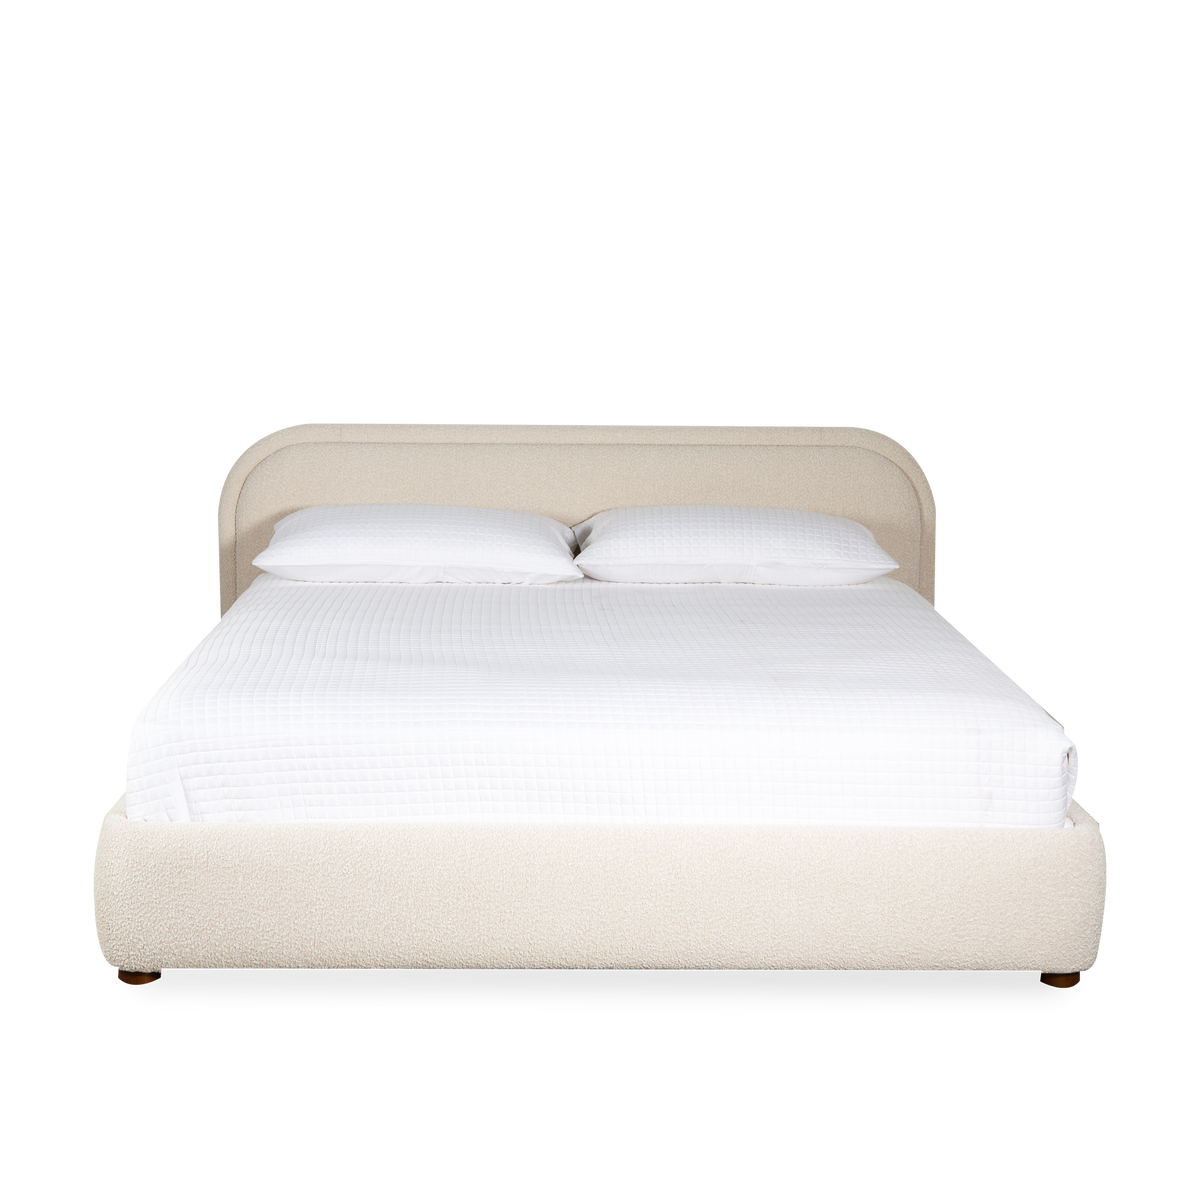 Embracing a gentle aesthetic, the Hollis Bed is a rich display of curving lines and soft edges.